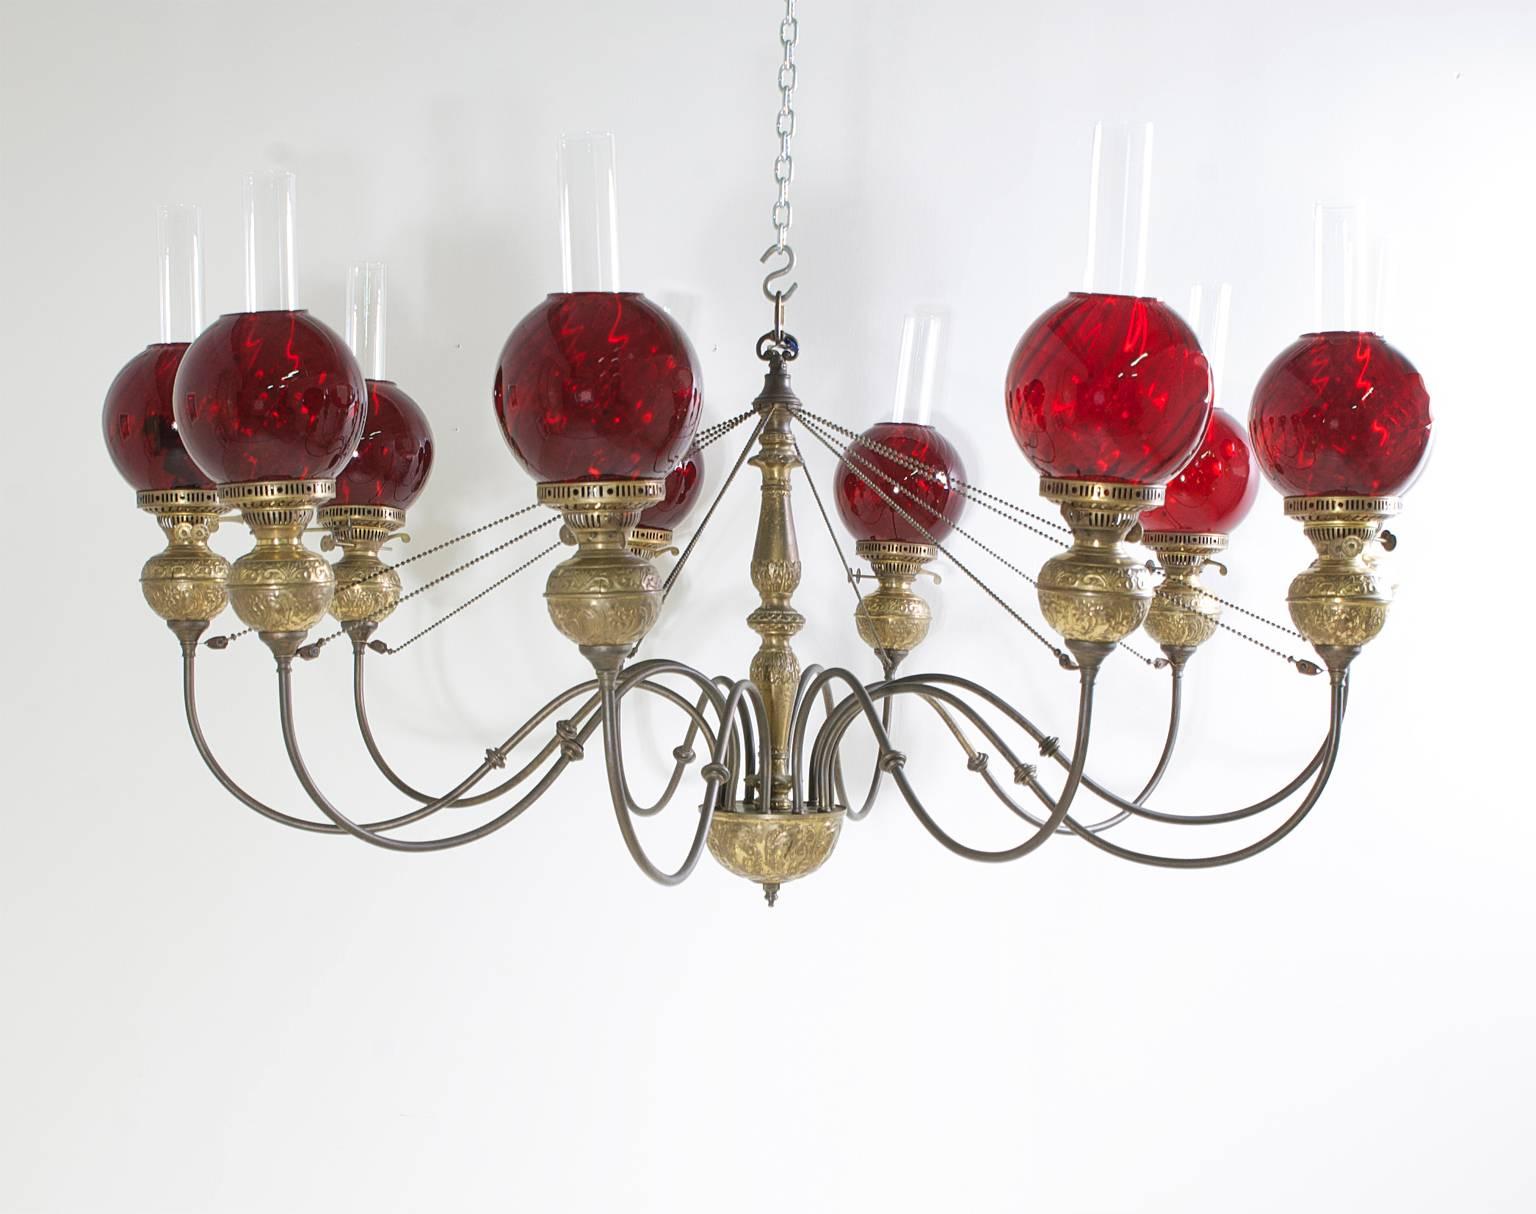 Hammered English Victorian Ten-Light Chandelier in Brass with Cranberry Glass Globes